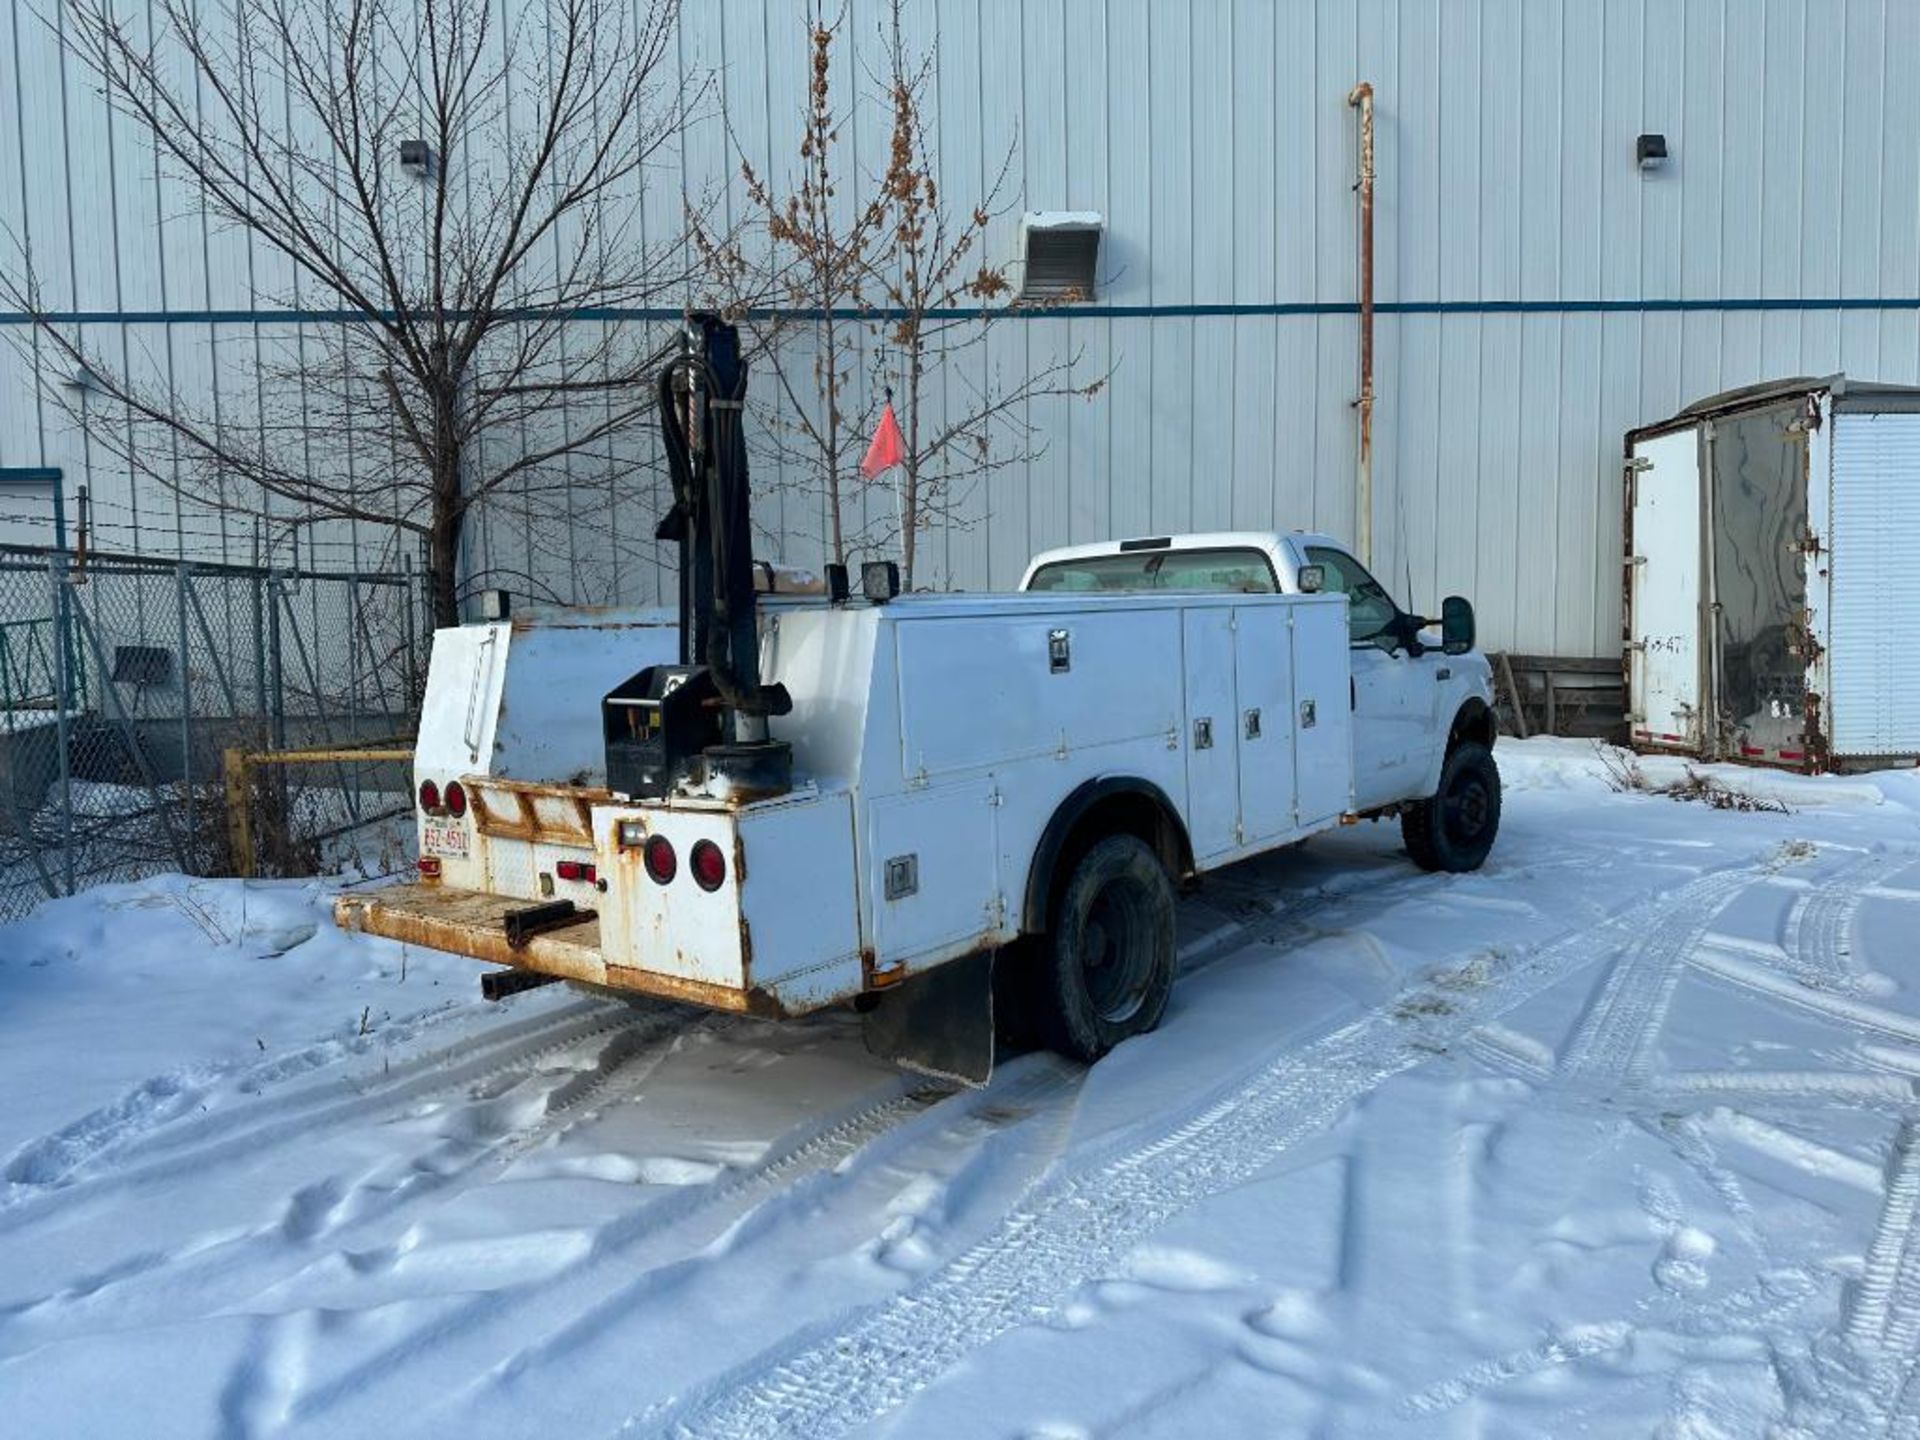 2000 Ford F-450 Service Truck with Hiab 008 Picker Crane VIN #: 1FDXF47S0YEB11508 - Image 3 of 10